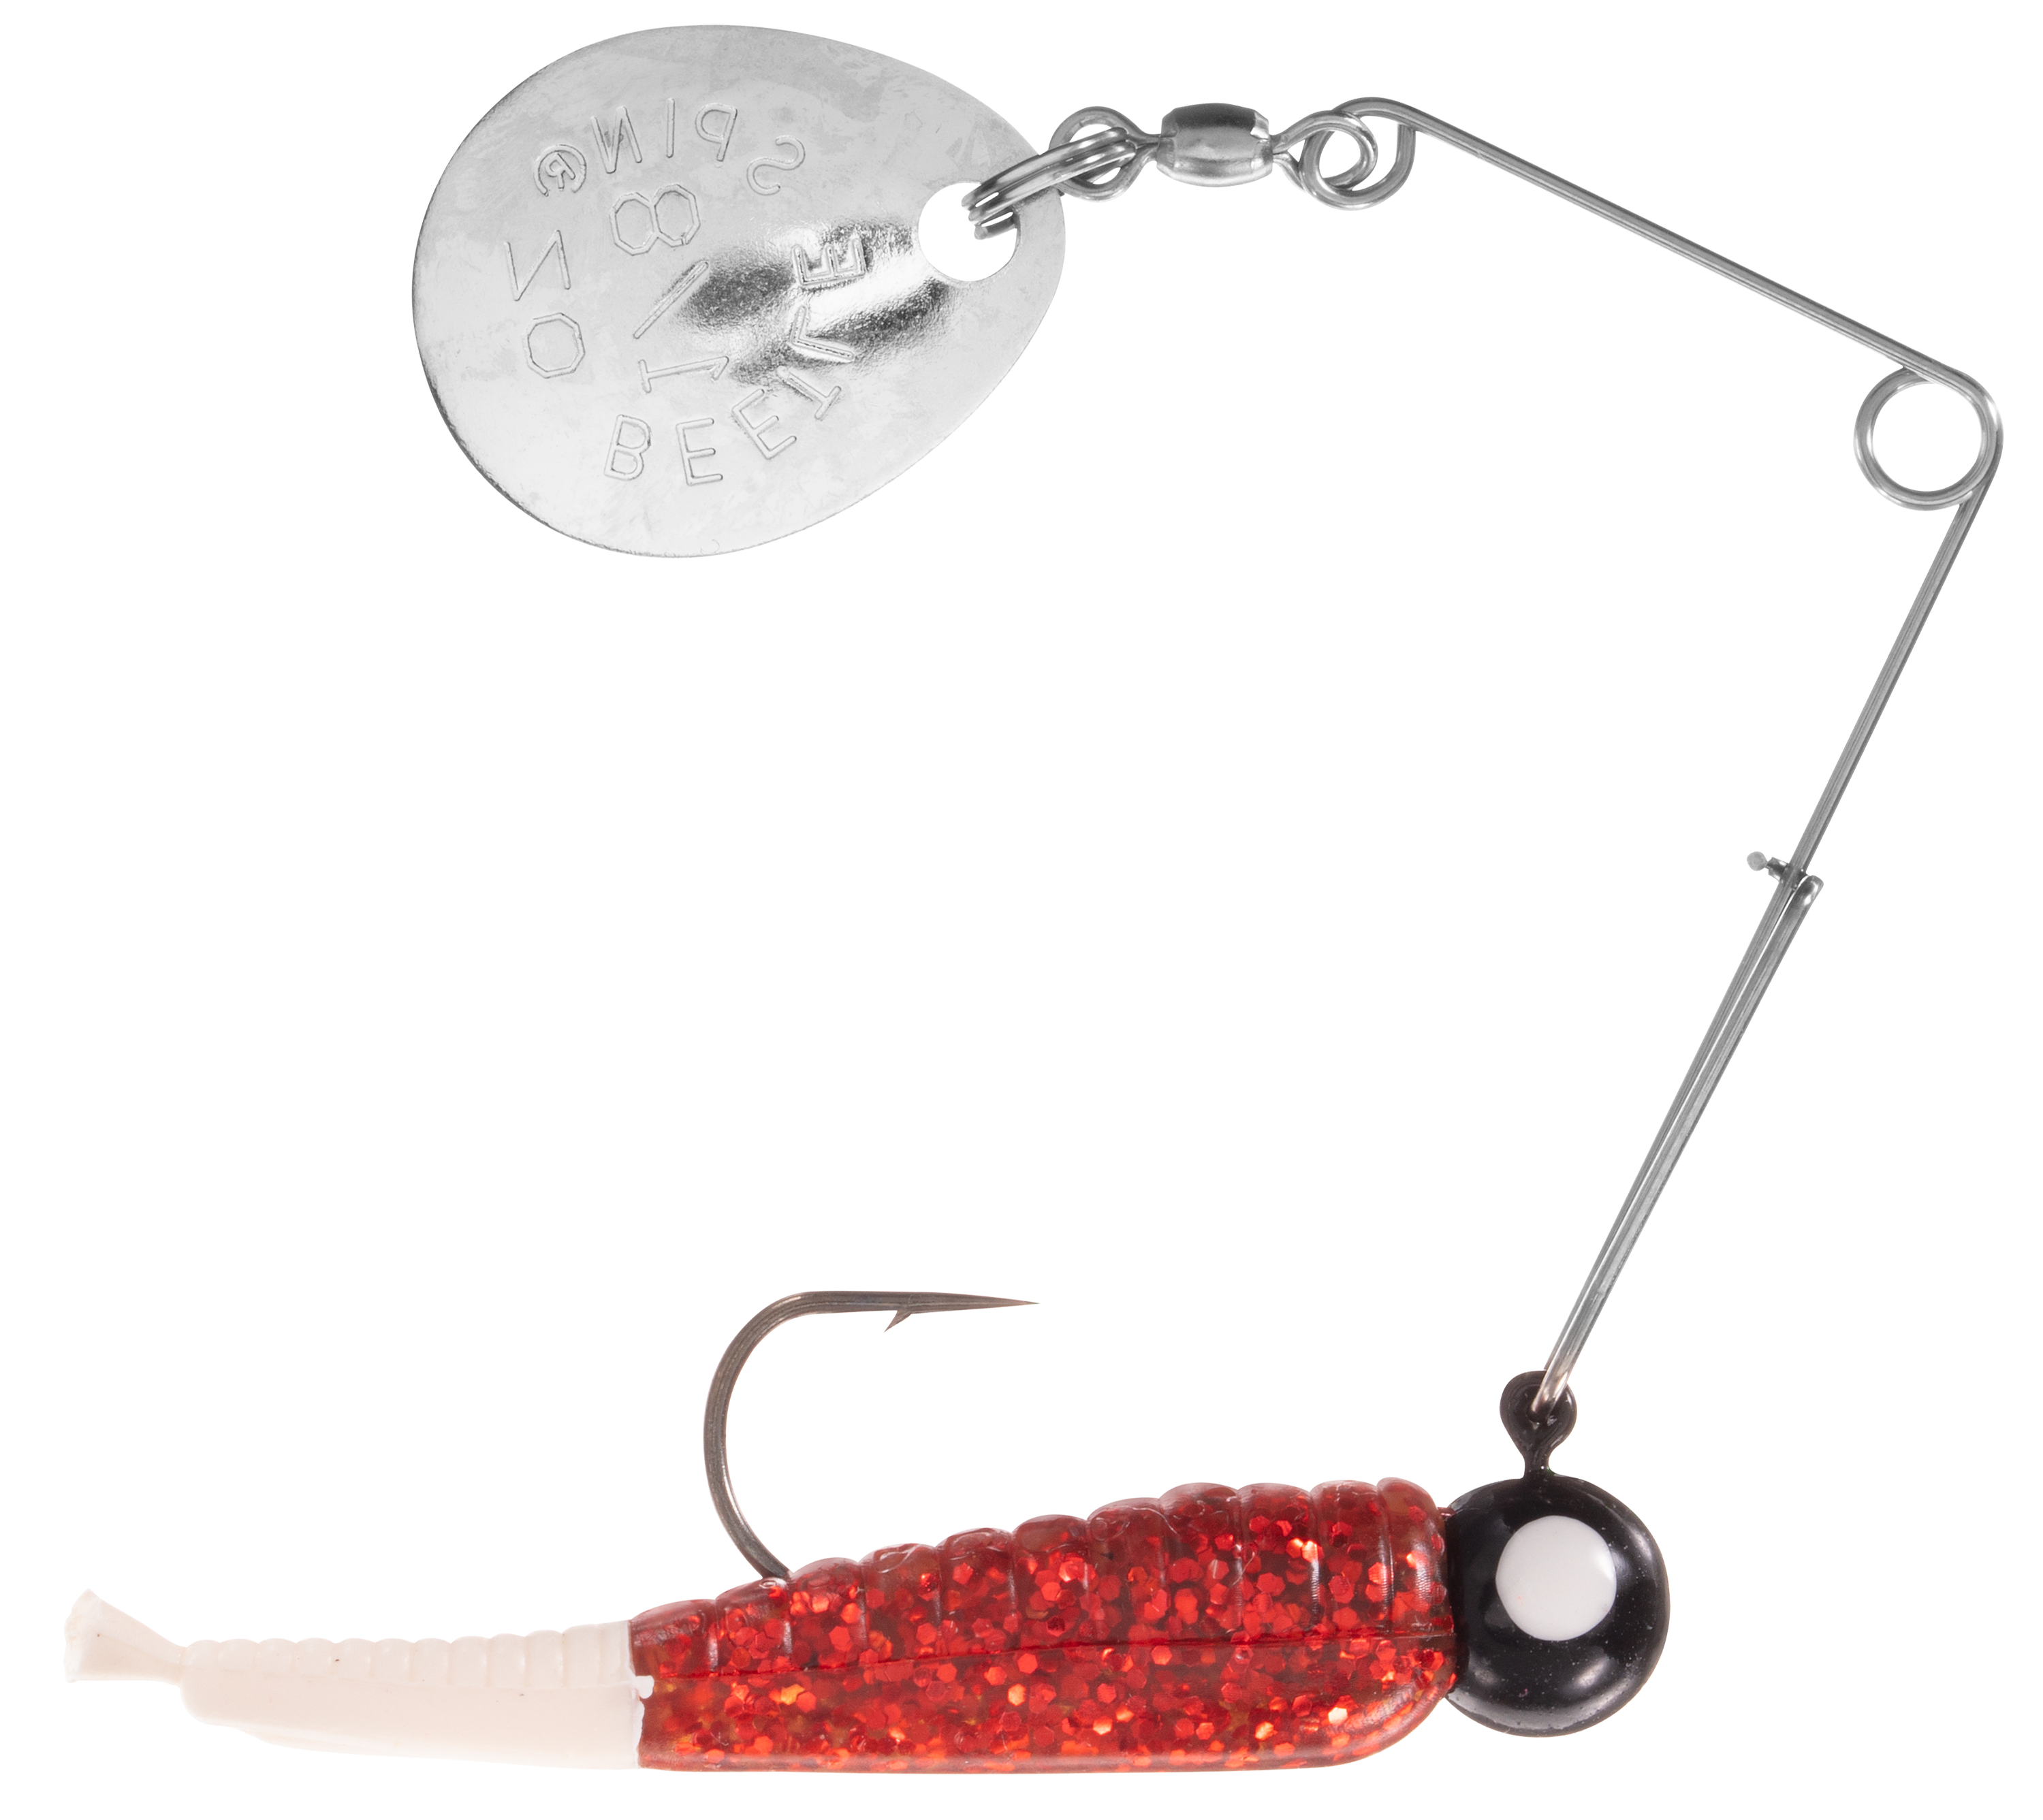 JOHNSON BEETLE SPIN 'R Bait 1/16 OZ Willow Blade BSBW1/16-CH